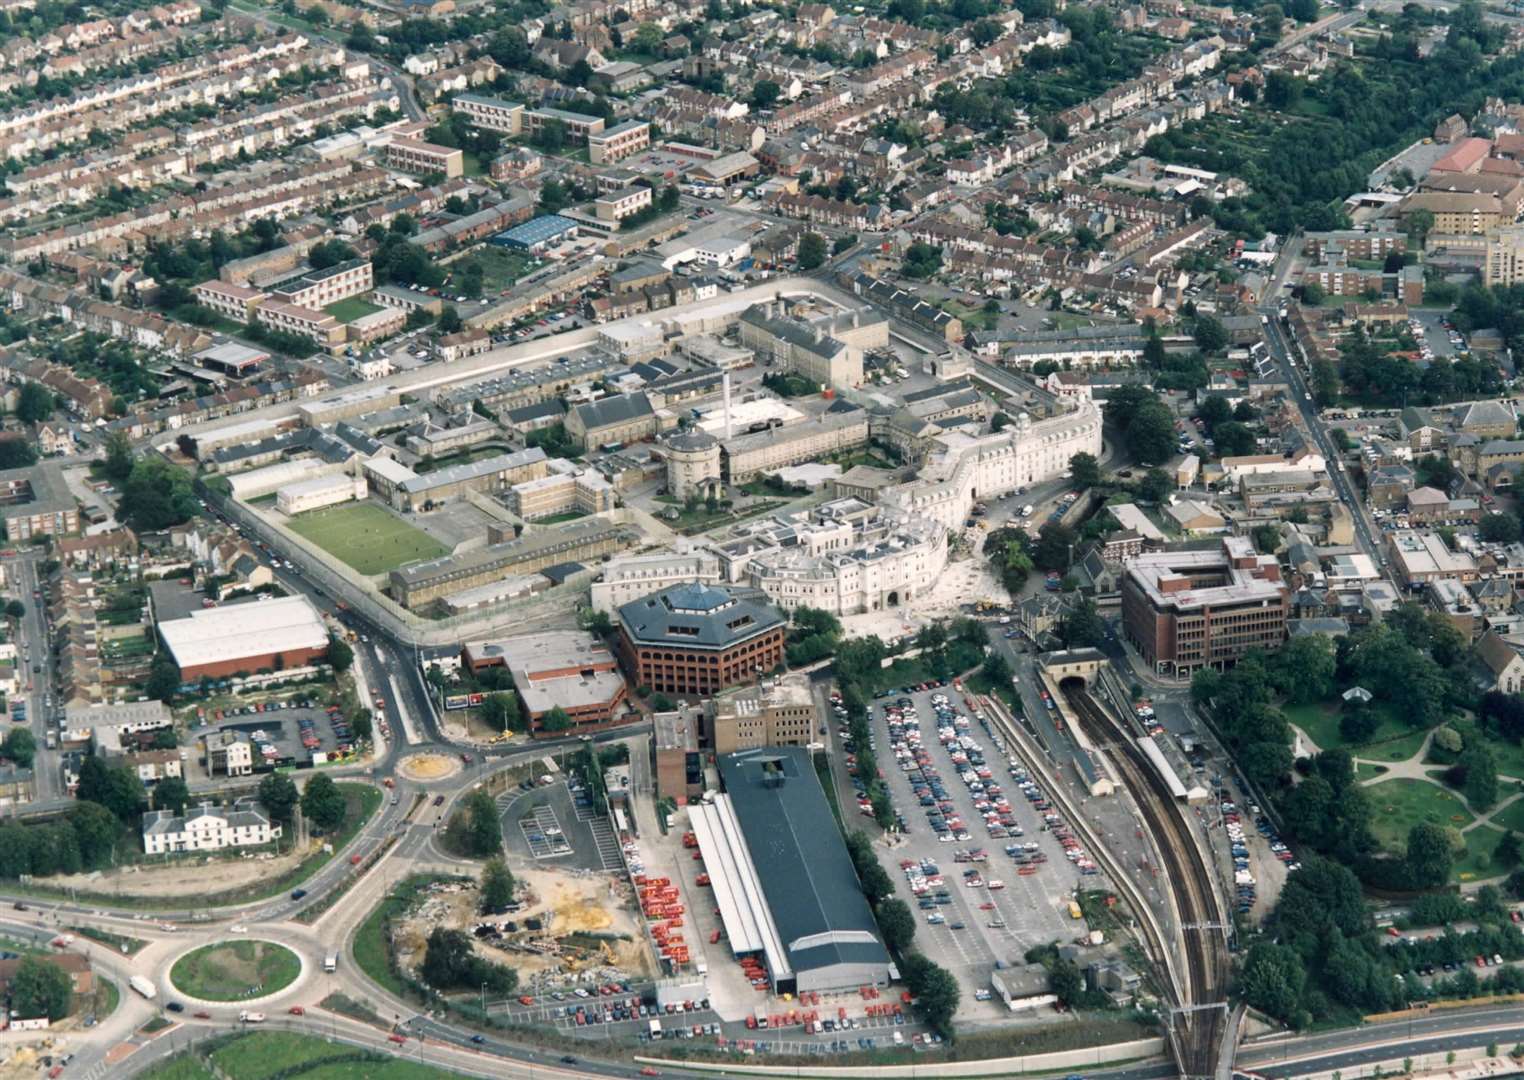 Maidstone prison and County Hall in the heart of the town